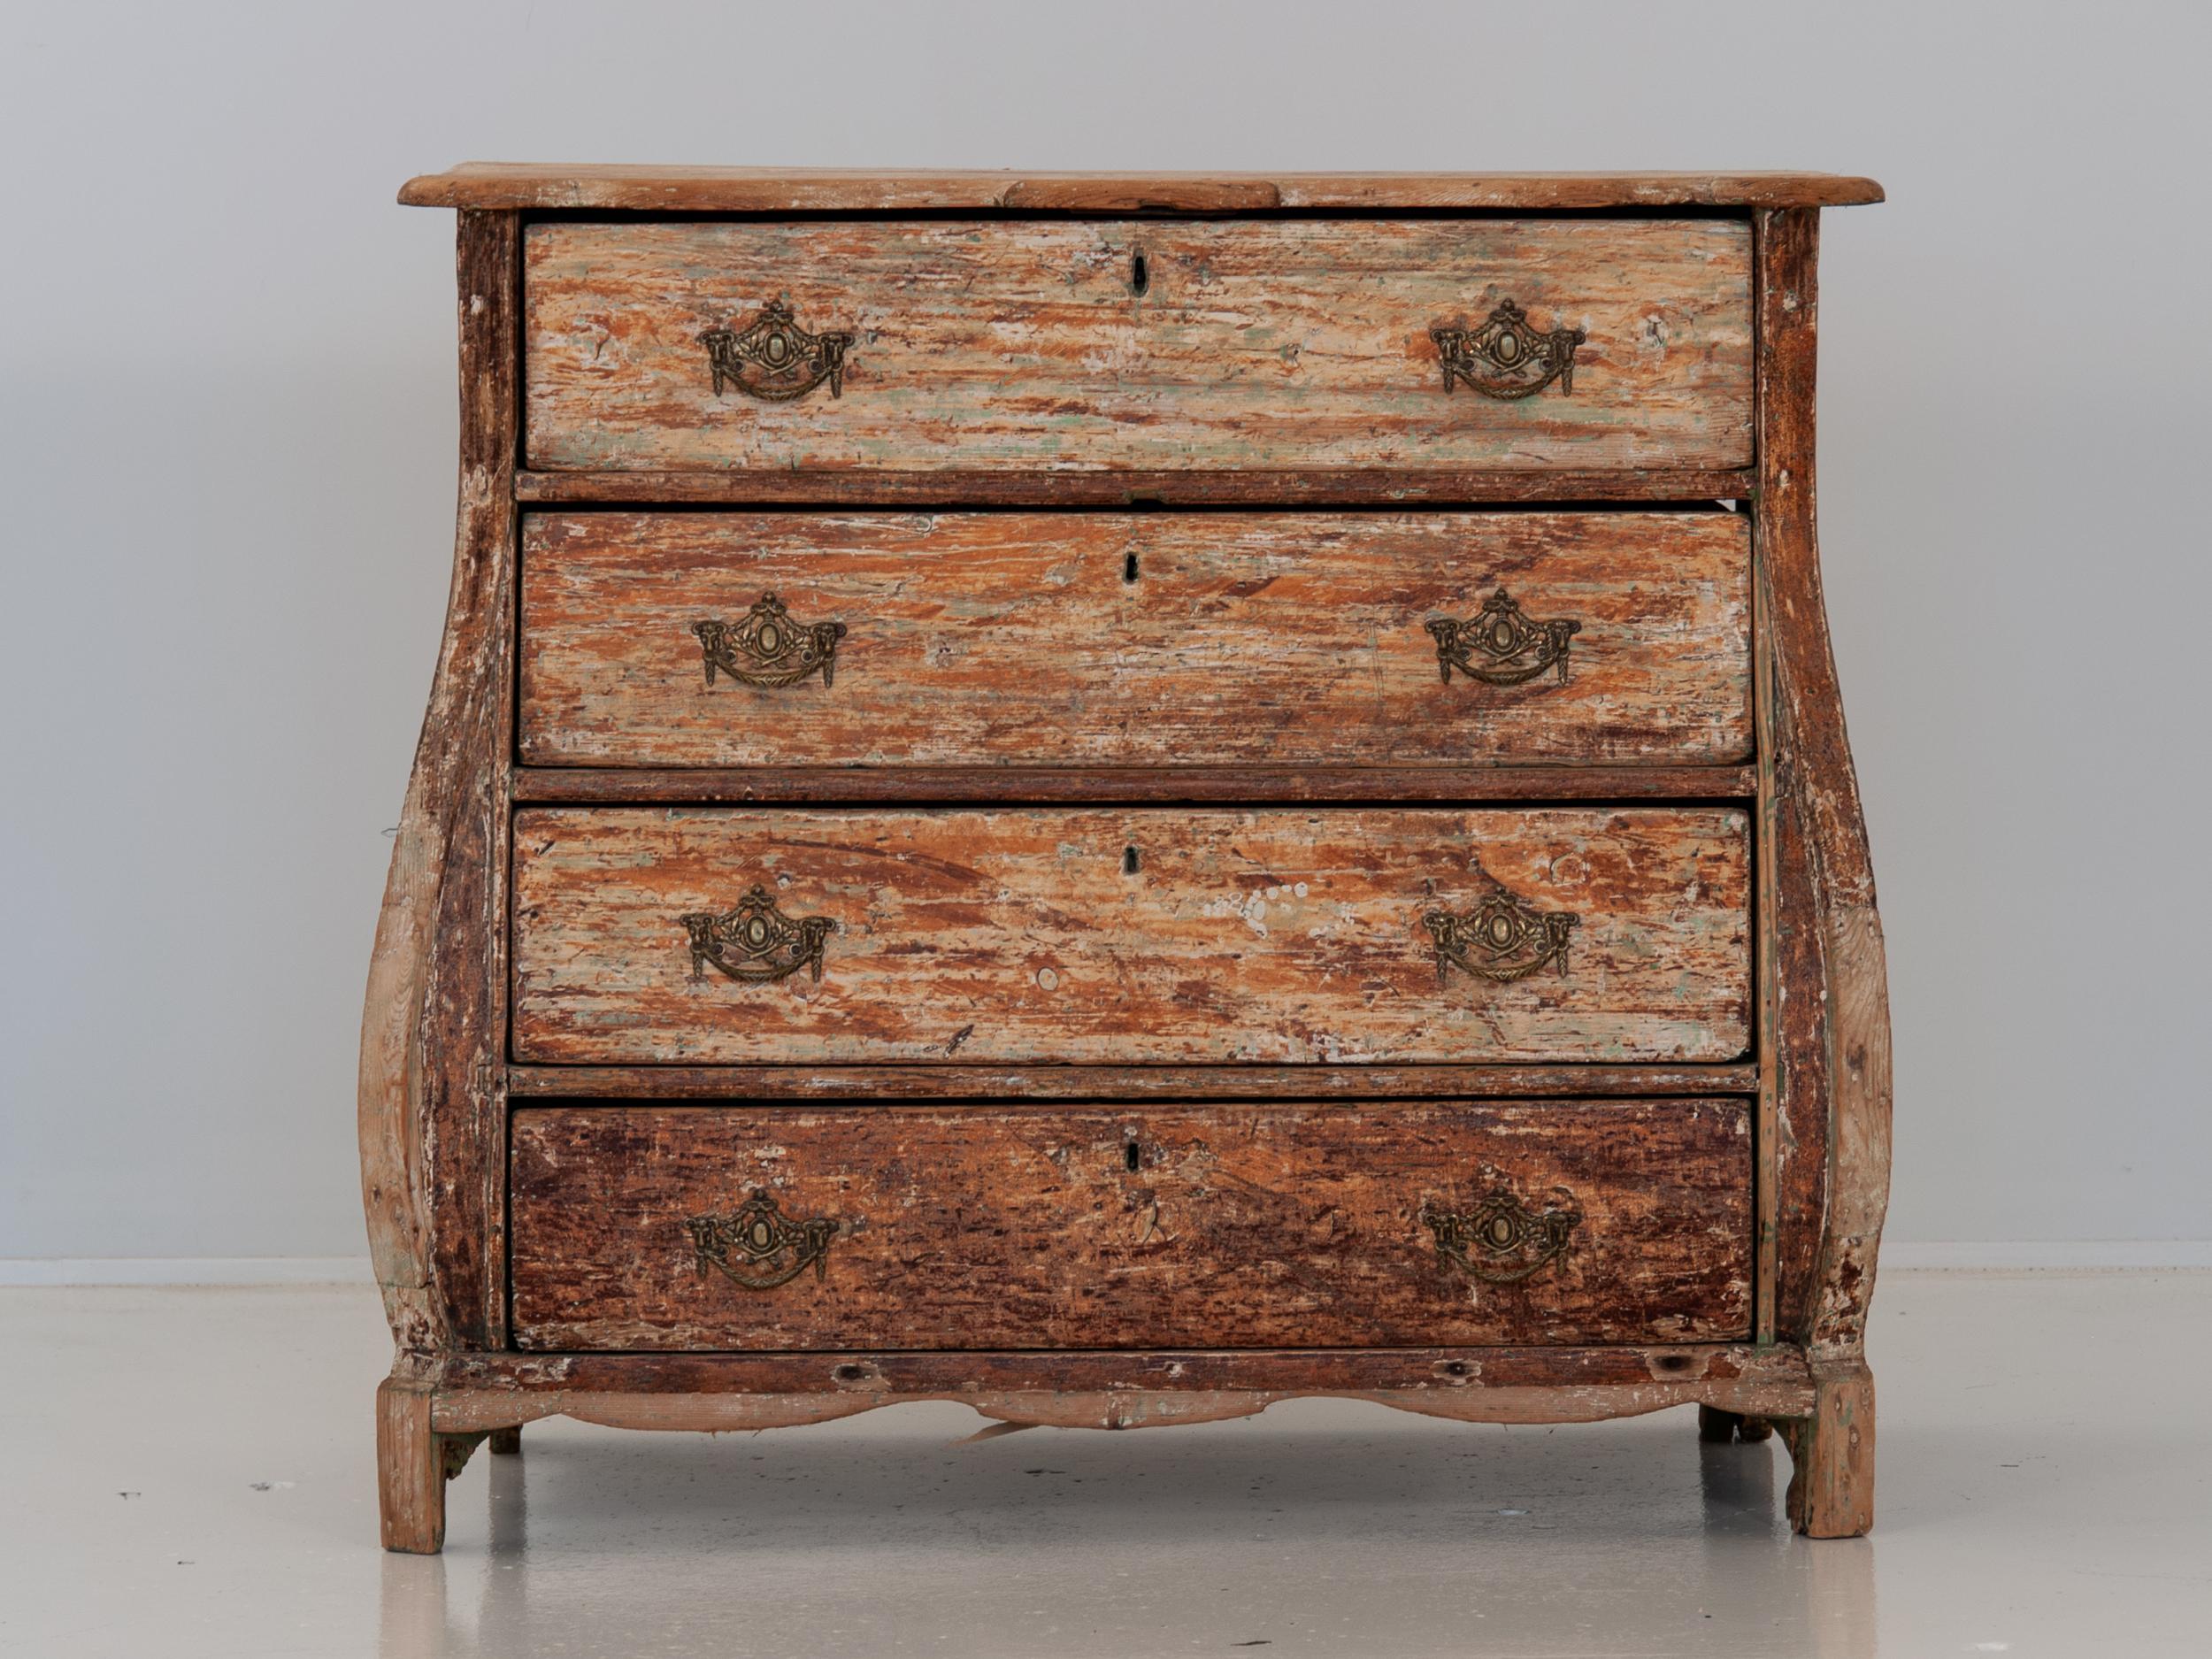 Dutch commode dry scarped to it's original painted surface. Unusual brass hardware featuring two lion heads holding a swag and branches. This is a simplified version of the iconic Dutch bombe commodes. Holland, circa 1800.